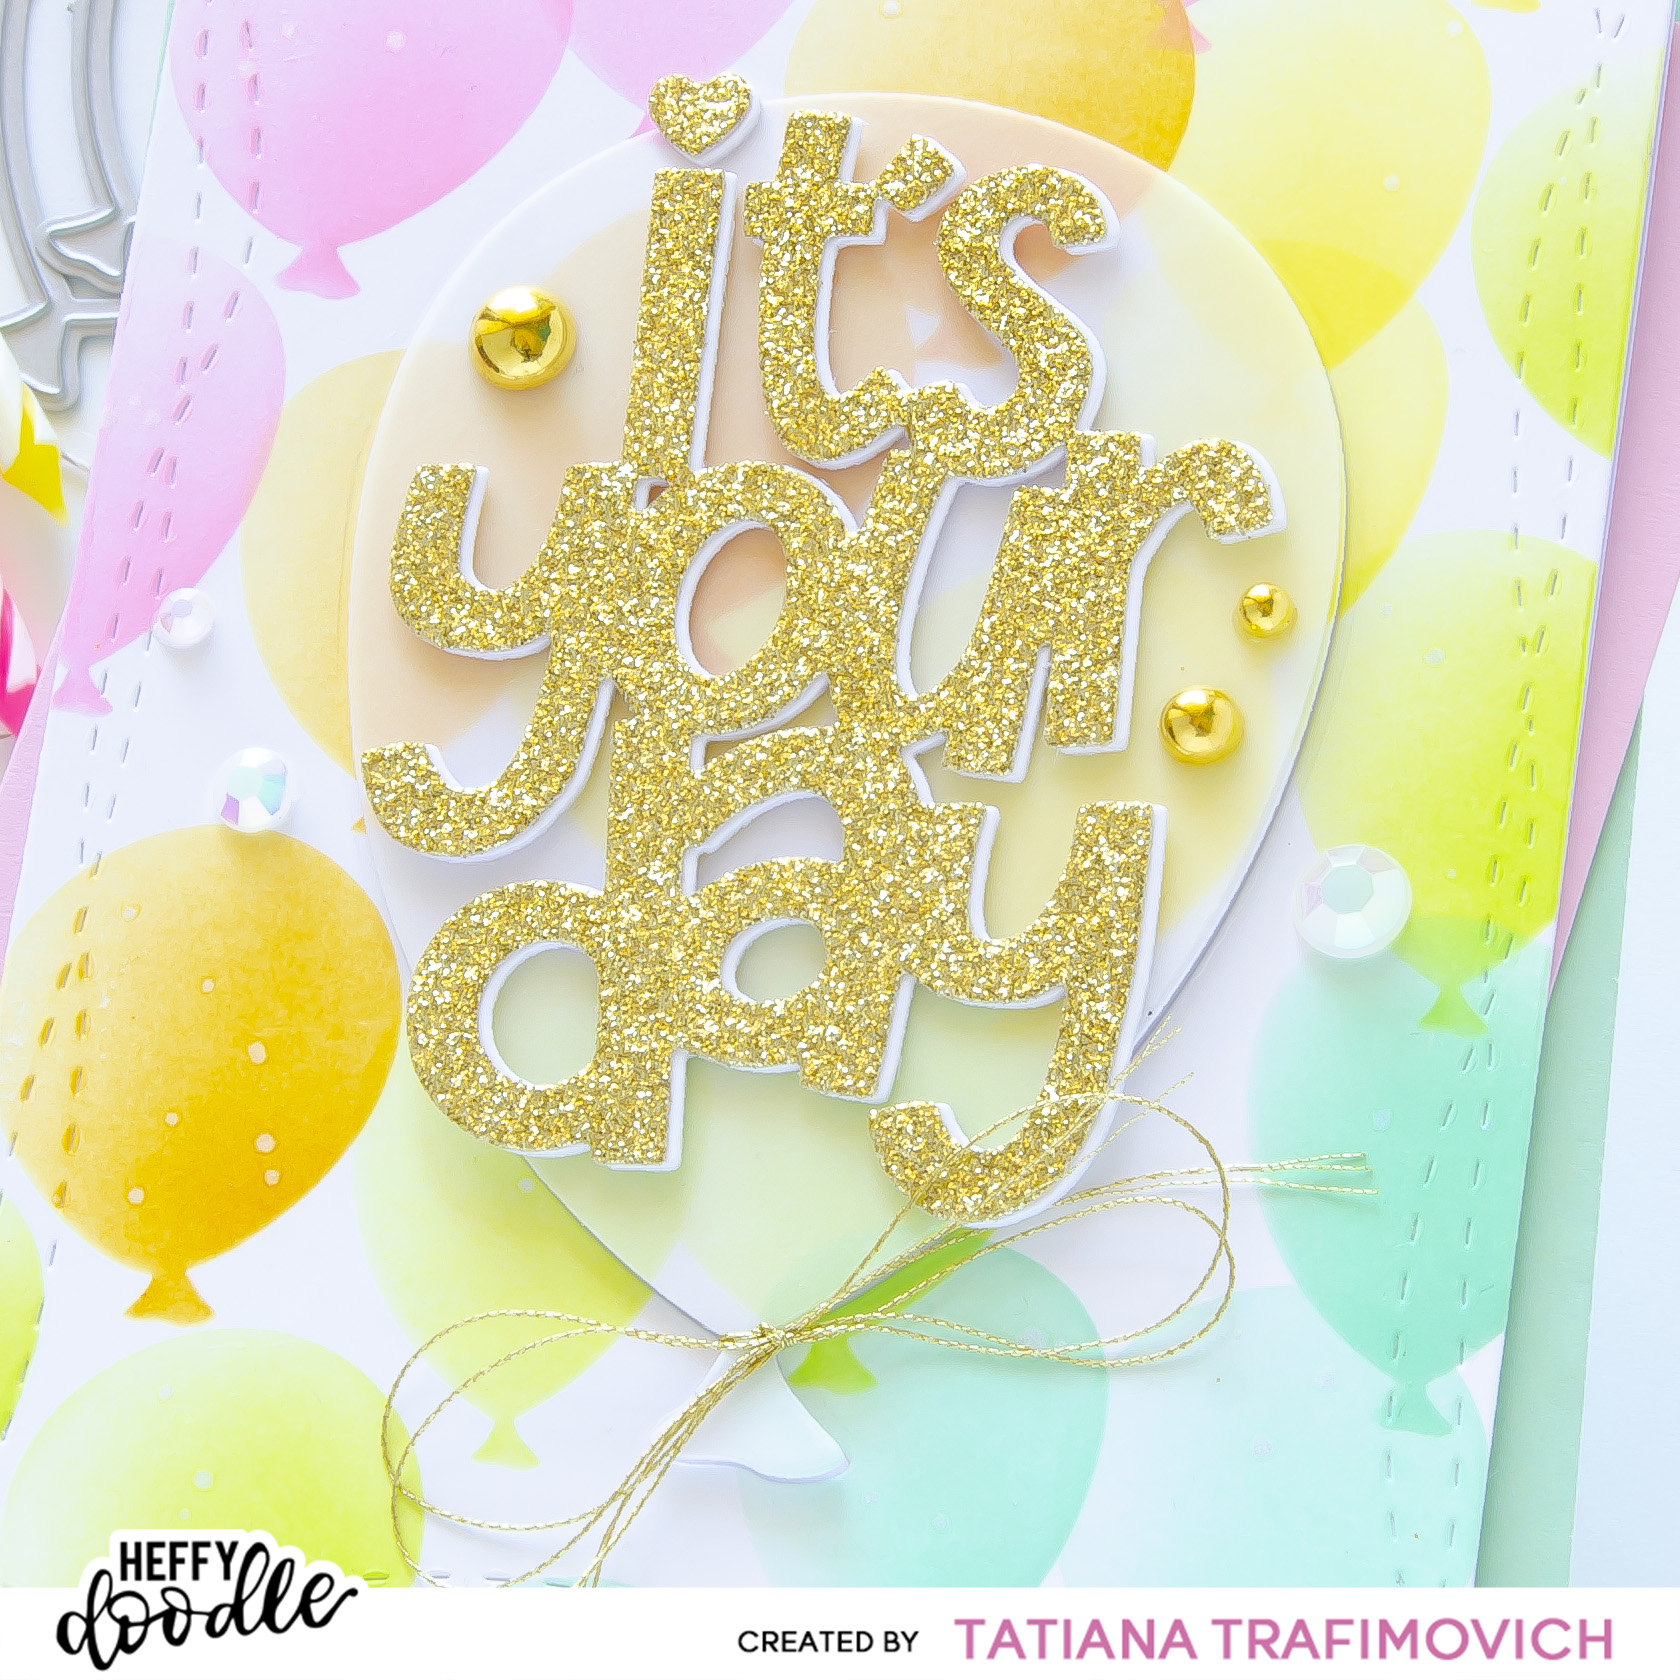 It's Your Day #handmade card by Tatiana Trafimovich #tatianacraftandart #tatianagraphicdesign - dies and stencils by Heffy Doodle #heffydoodle and Trinity Stamps #trinitystamps